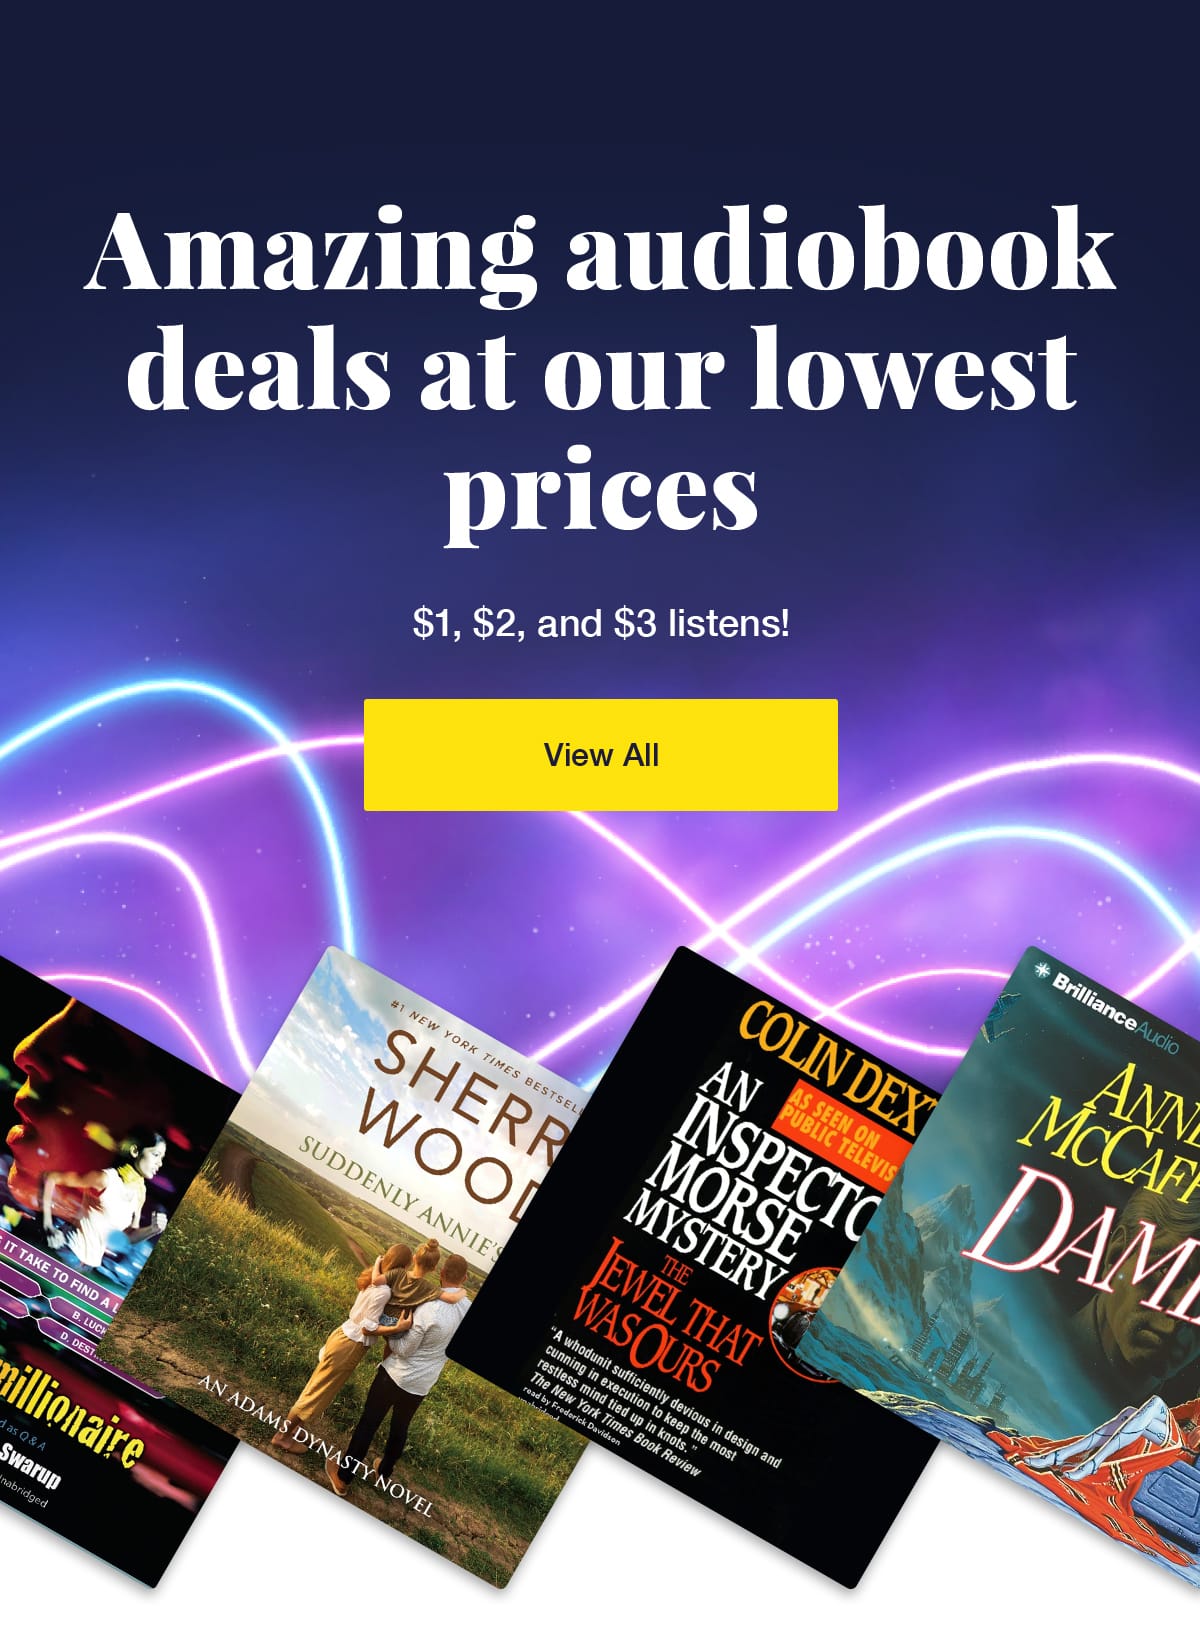 Amazing audiobook deals at our lowest prices